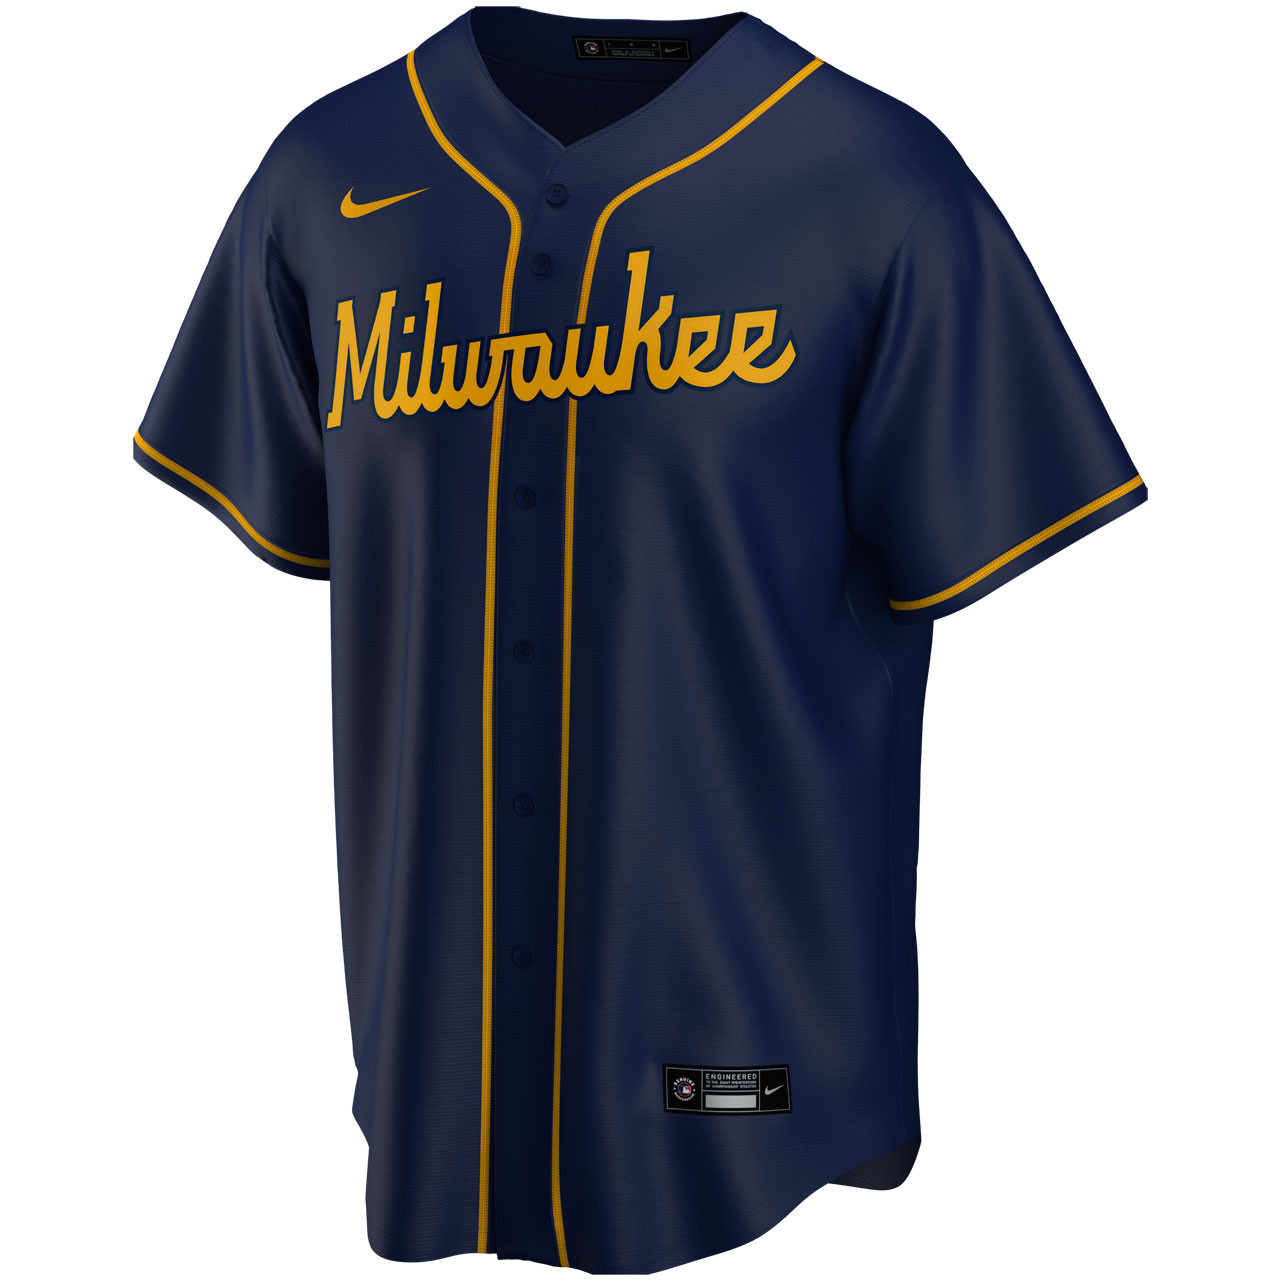 royal blue brewers jersey